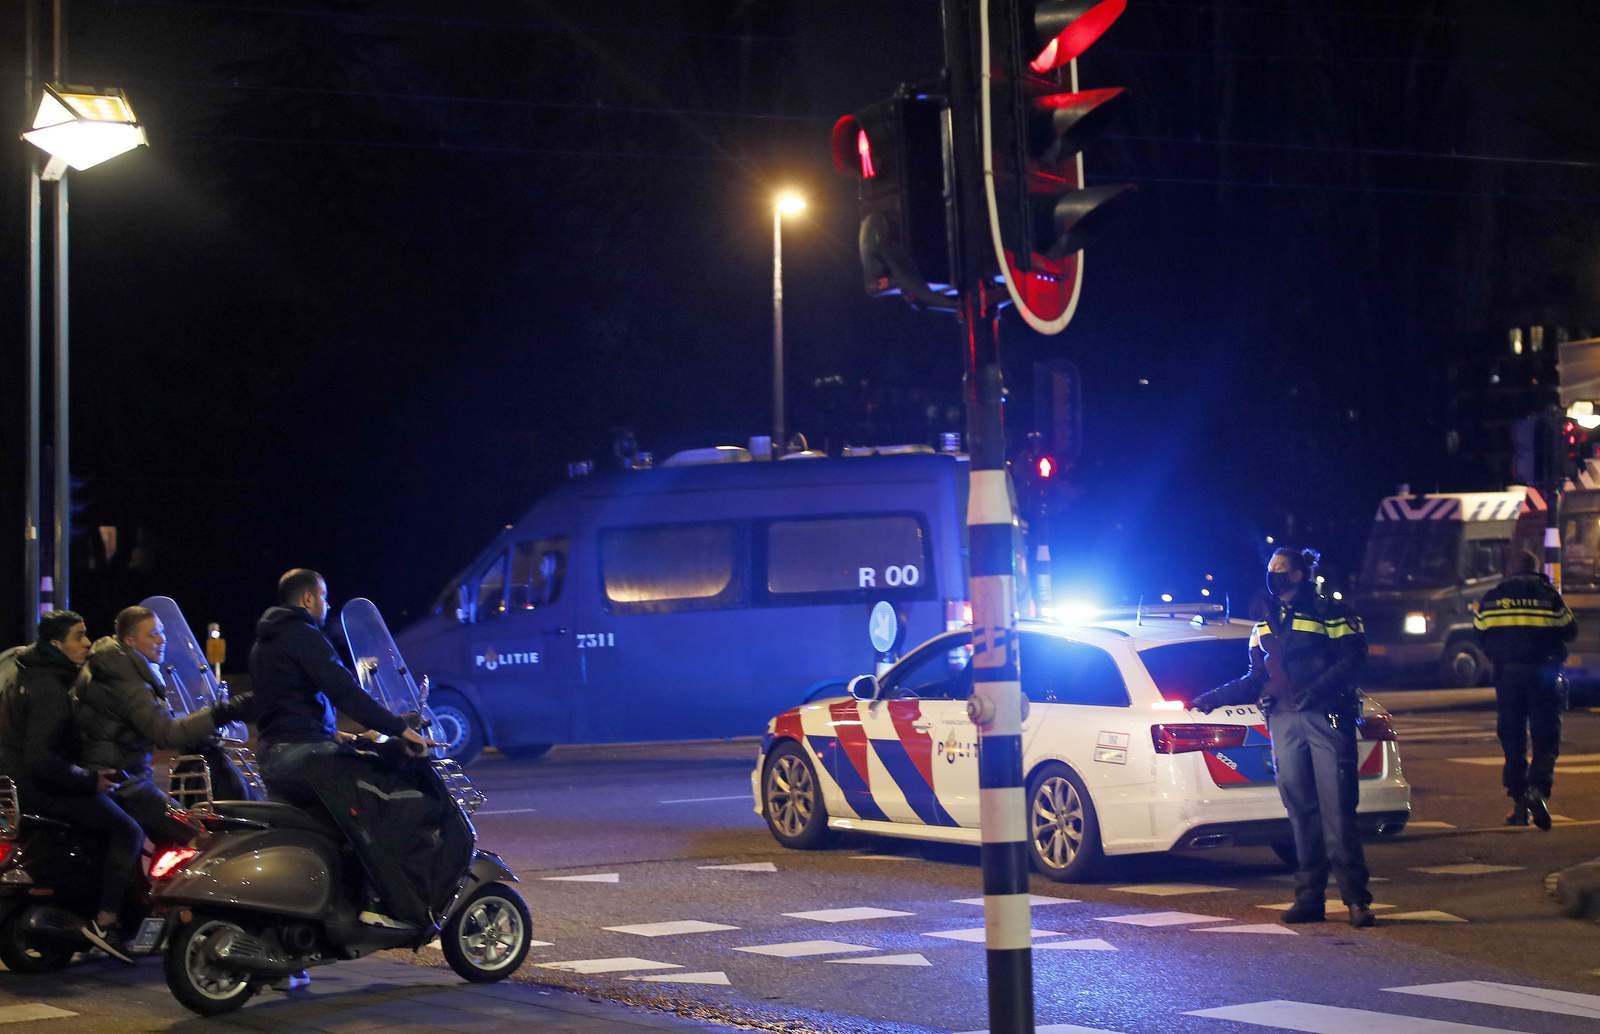 Dutch police deployed in force to curb rioting, looting